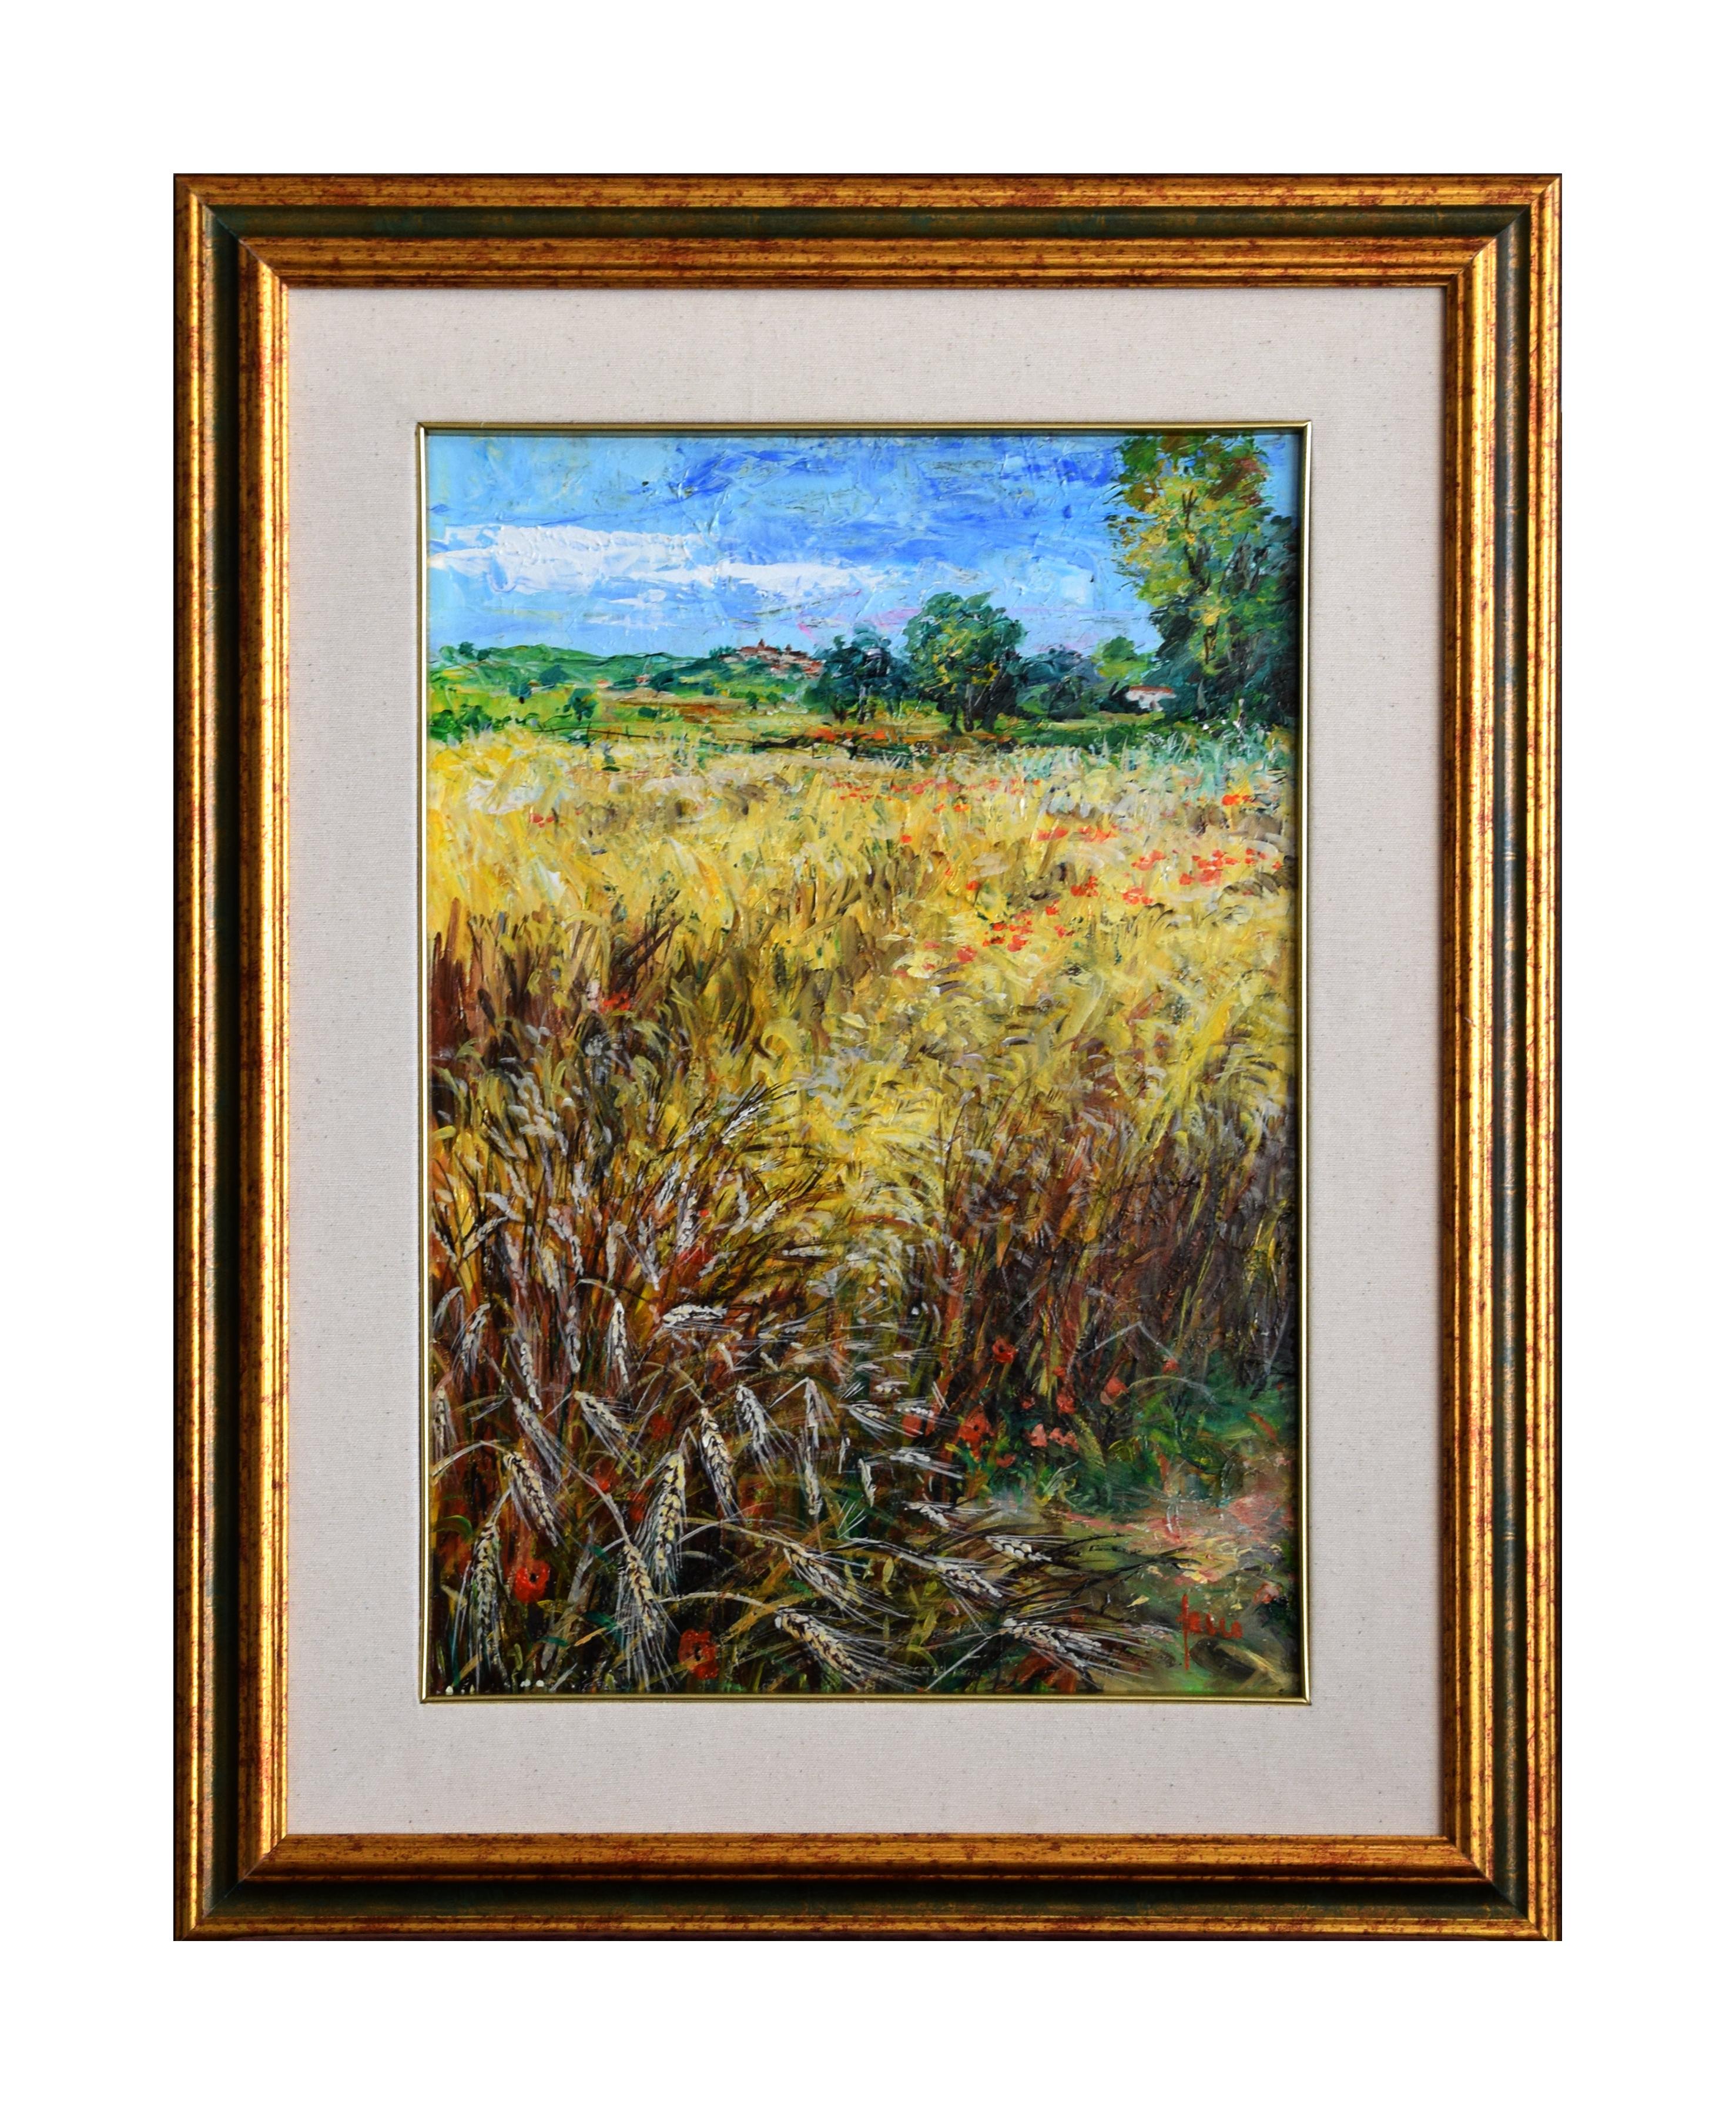 Cornfields - Oil on Canvas by Luciano Sacco 